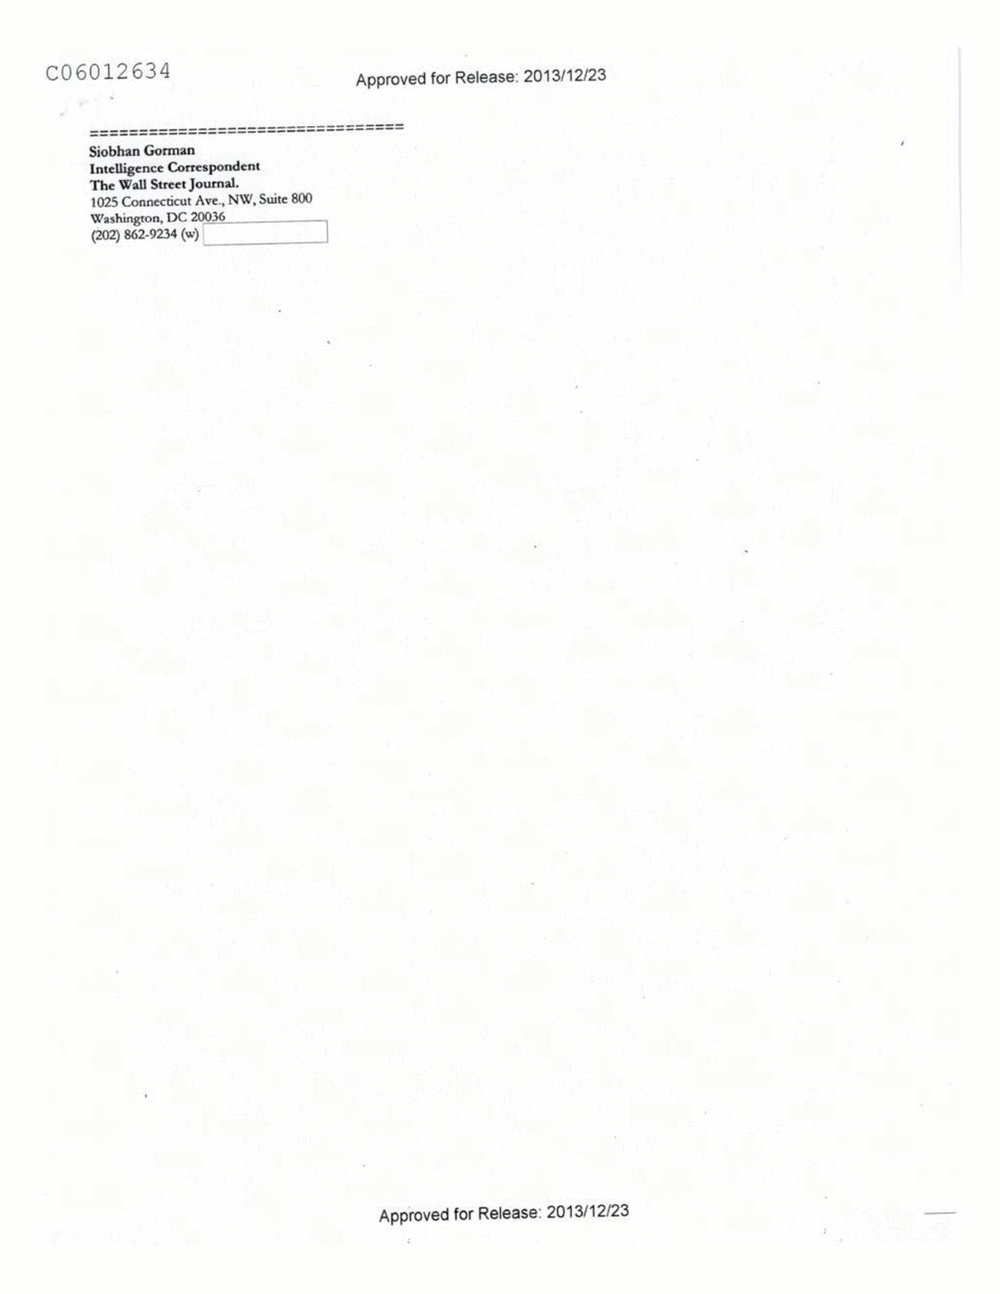 Page 197 from Email Correspondence Between Reporters and CIA Flacks